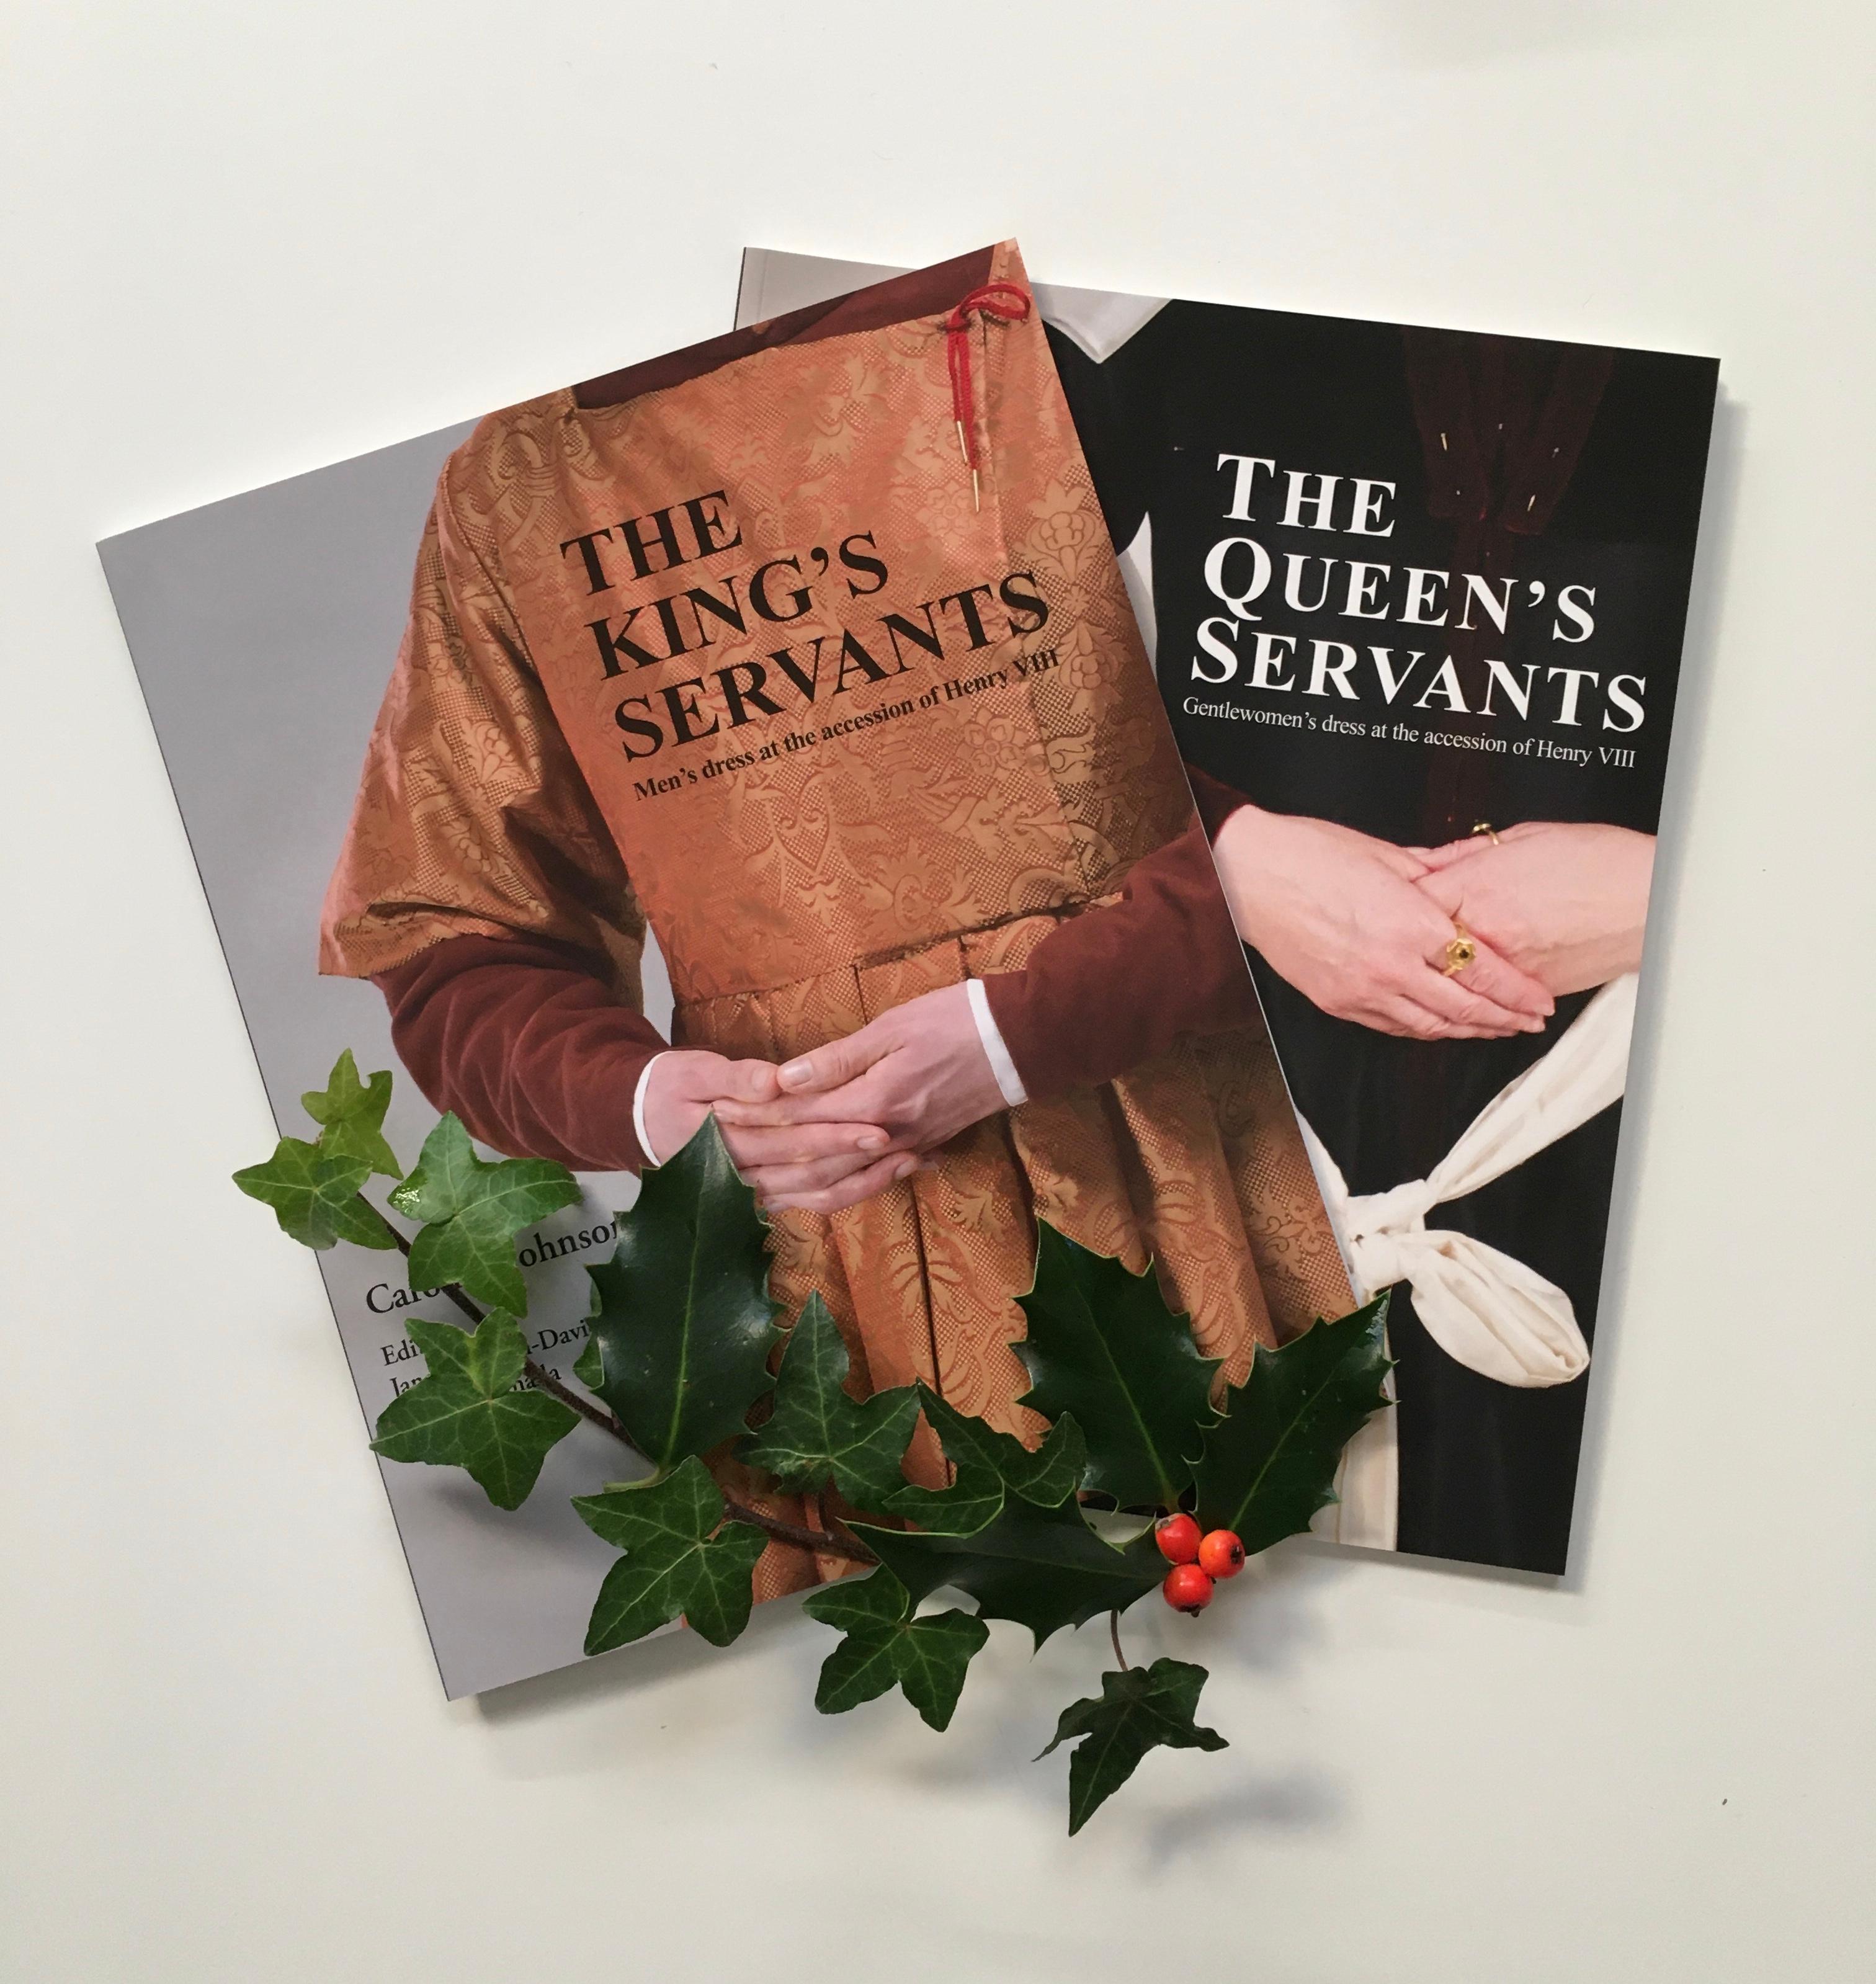 The new, improved second edition of The King's Servants was published in September 2020